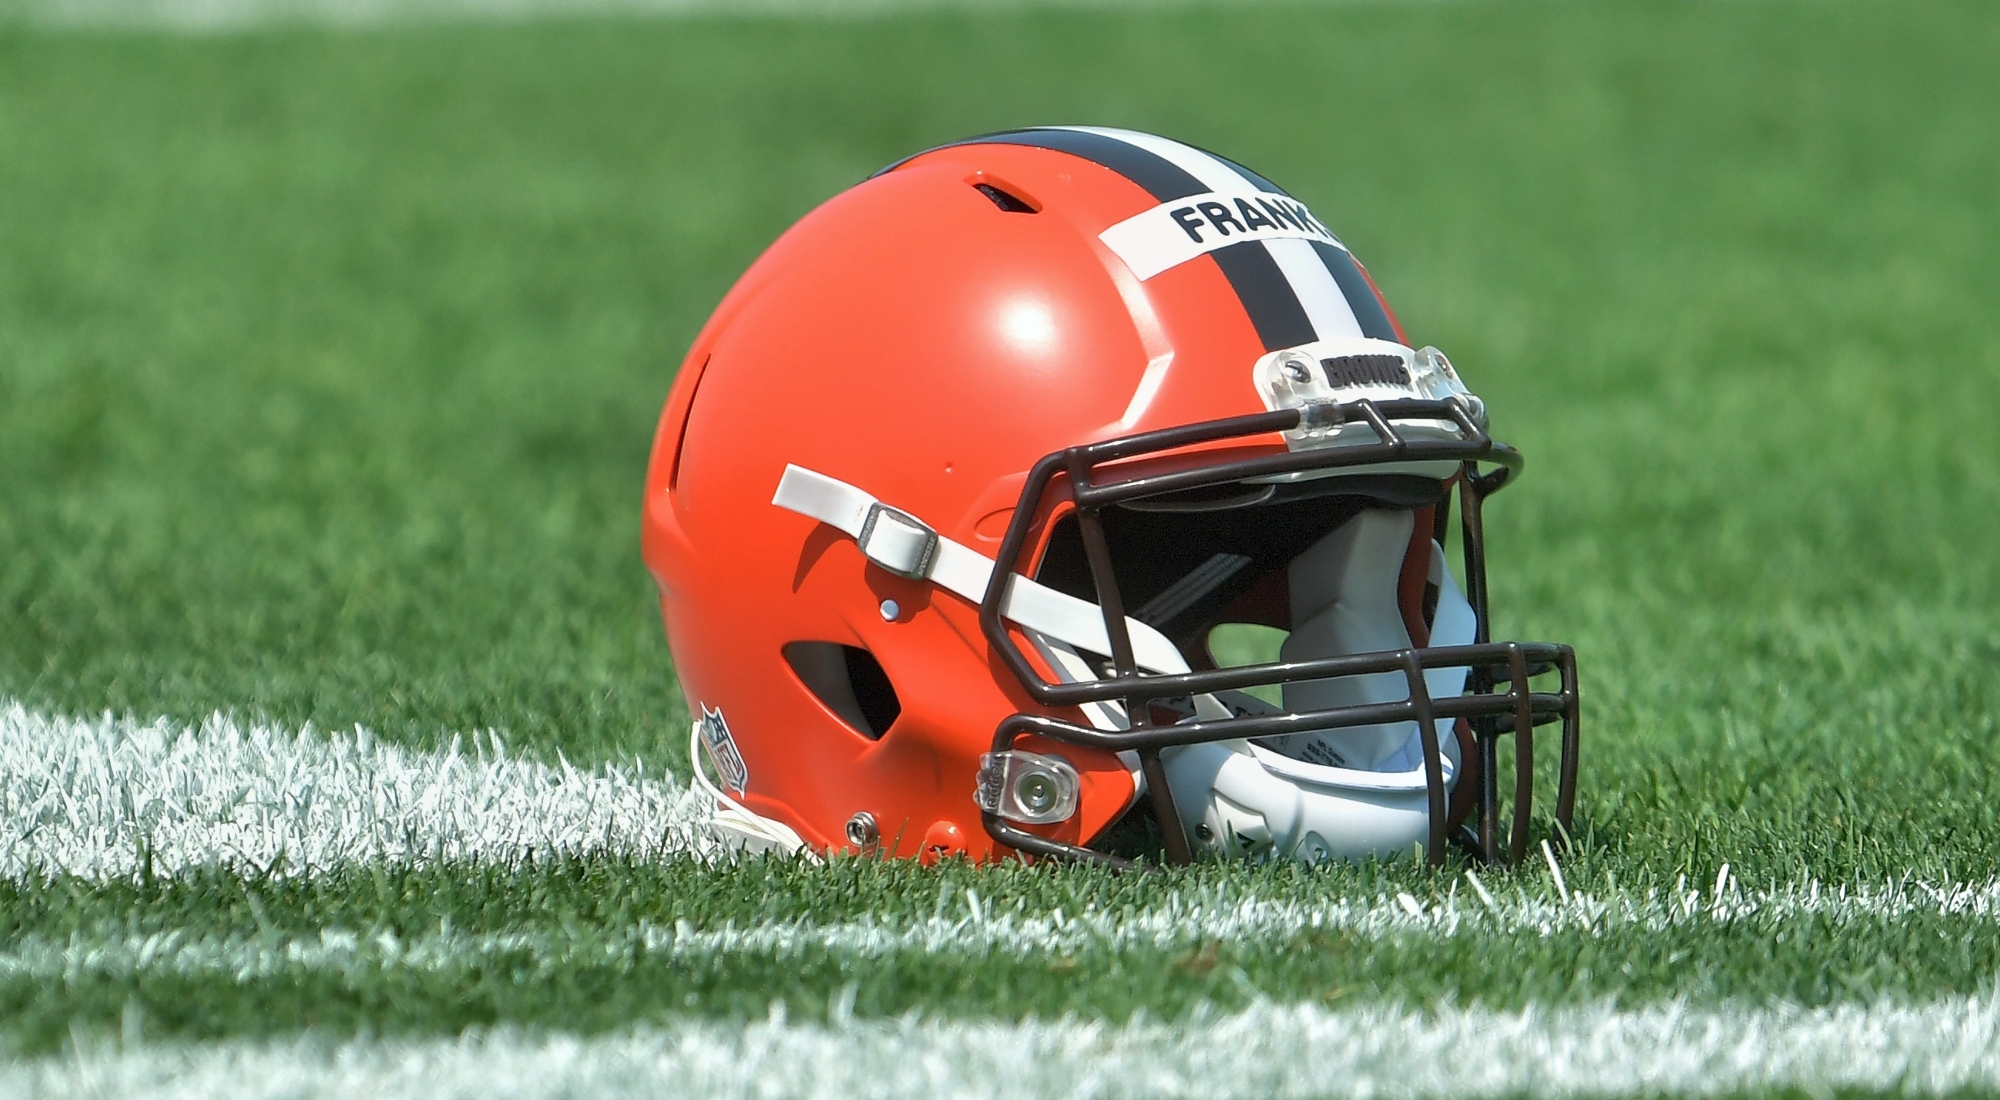 BREAKING: Cleveland Browns Suffered Season-Ending Injury